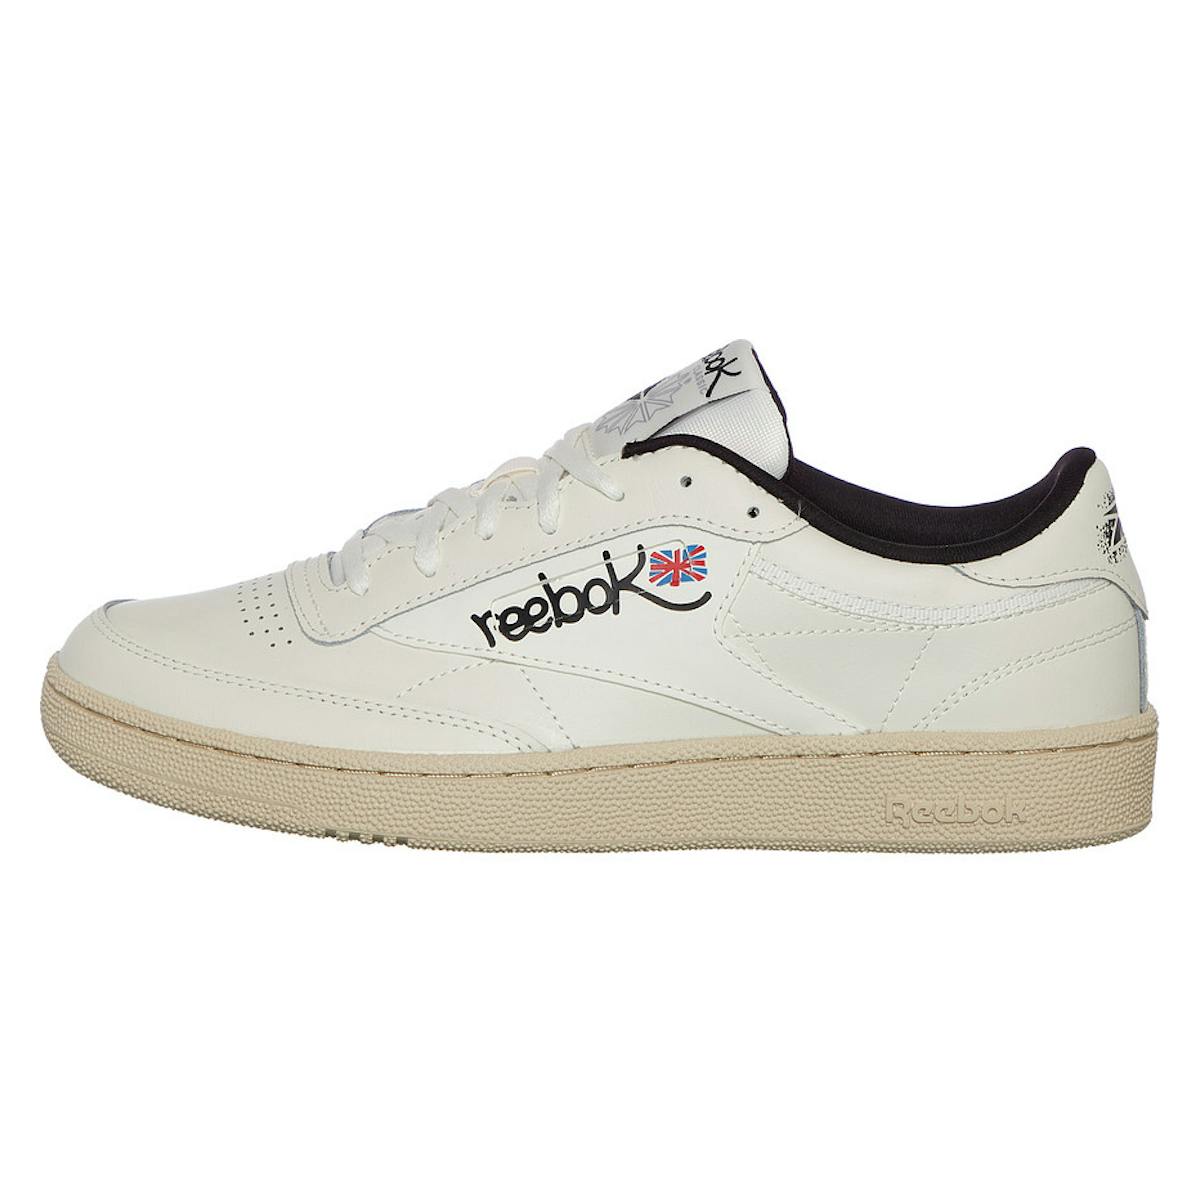 Reebok Club C 85 (J. W. Foster & Sons Incorporated Edition)